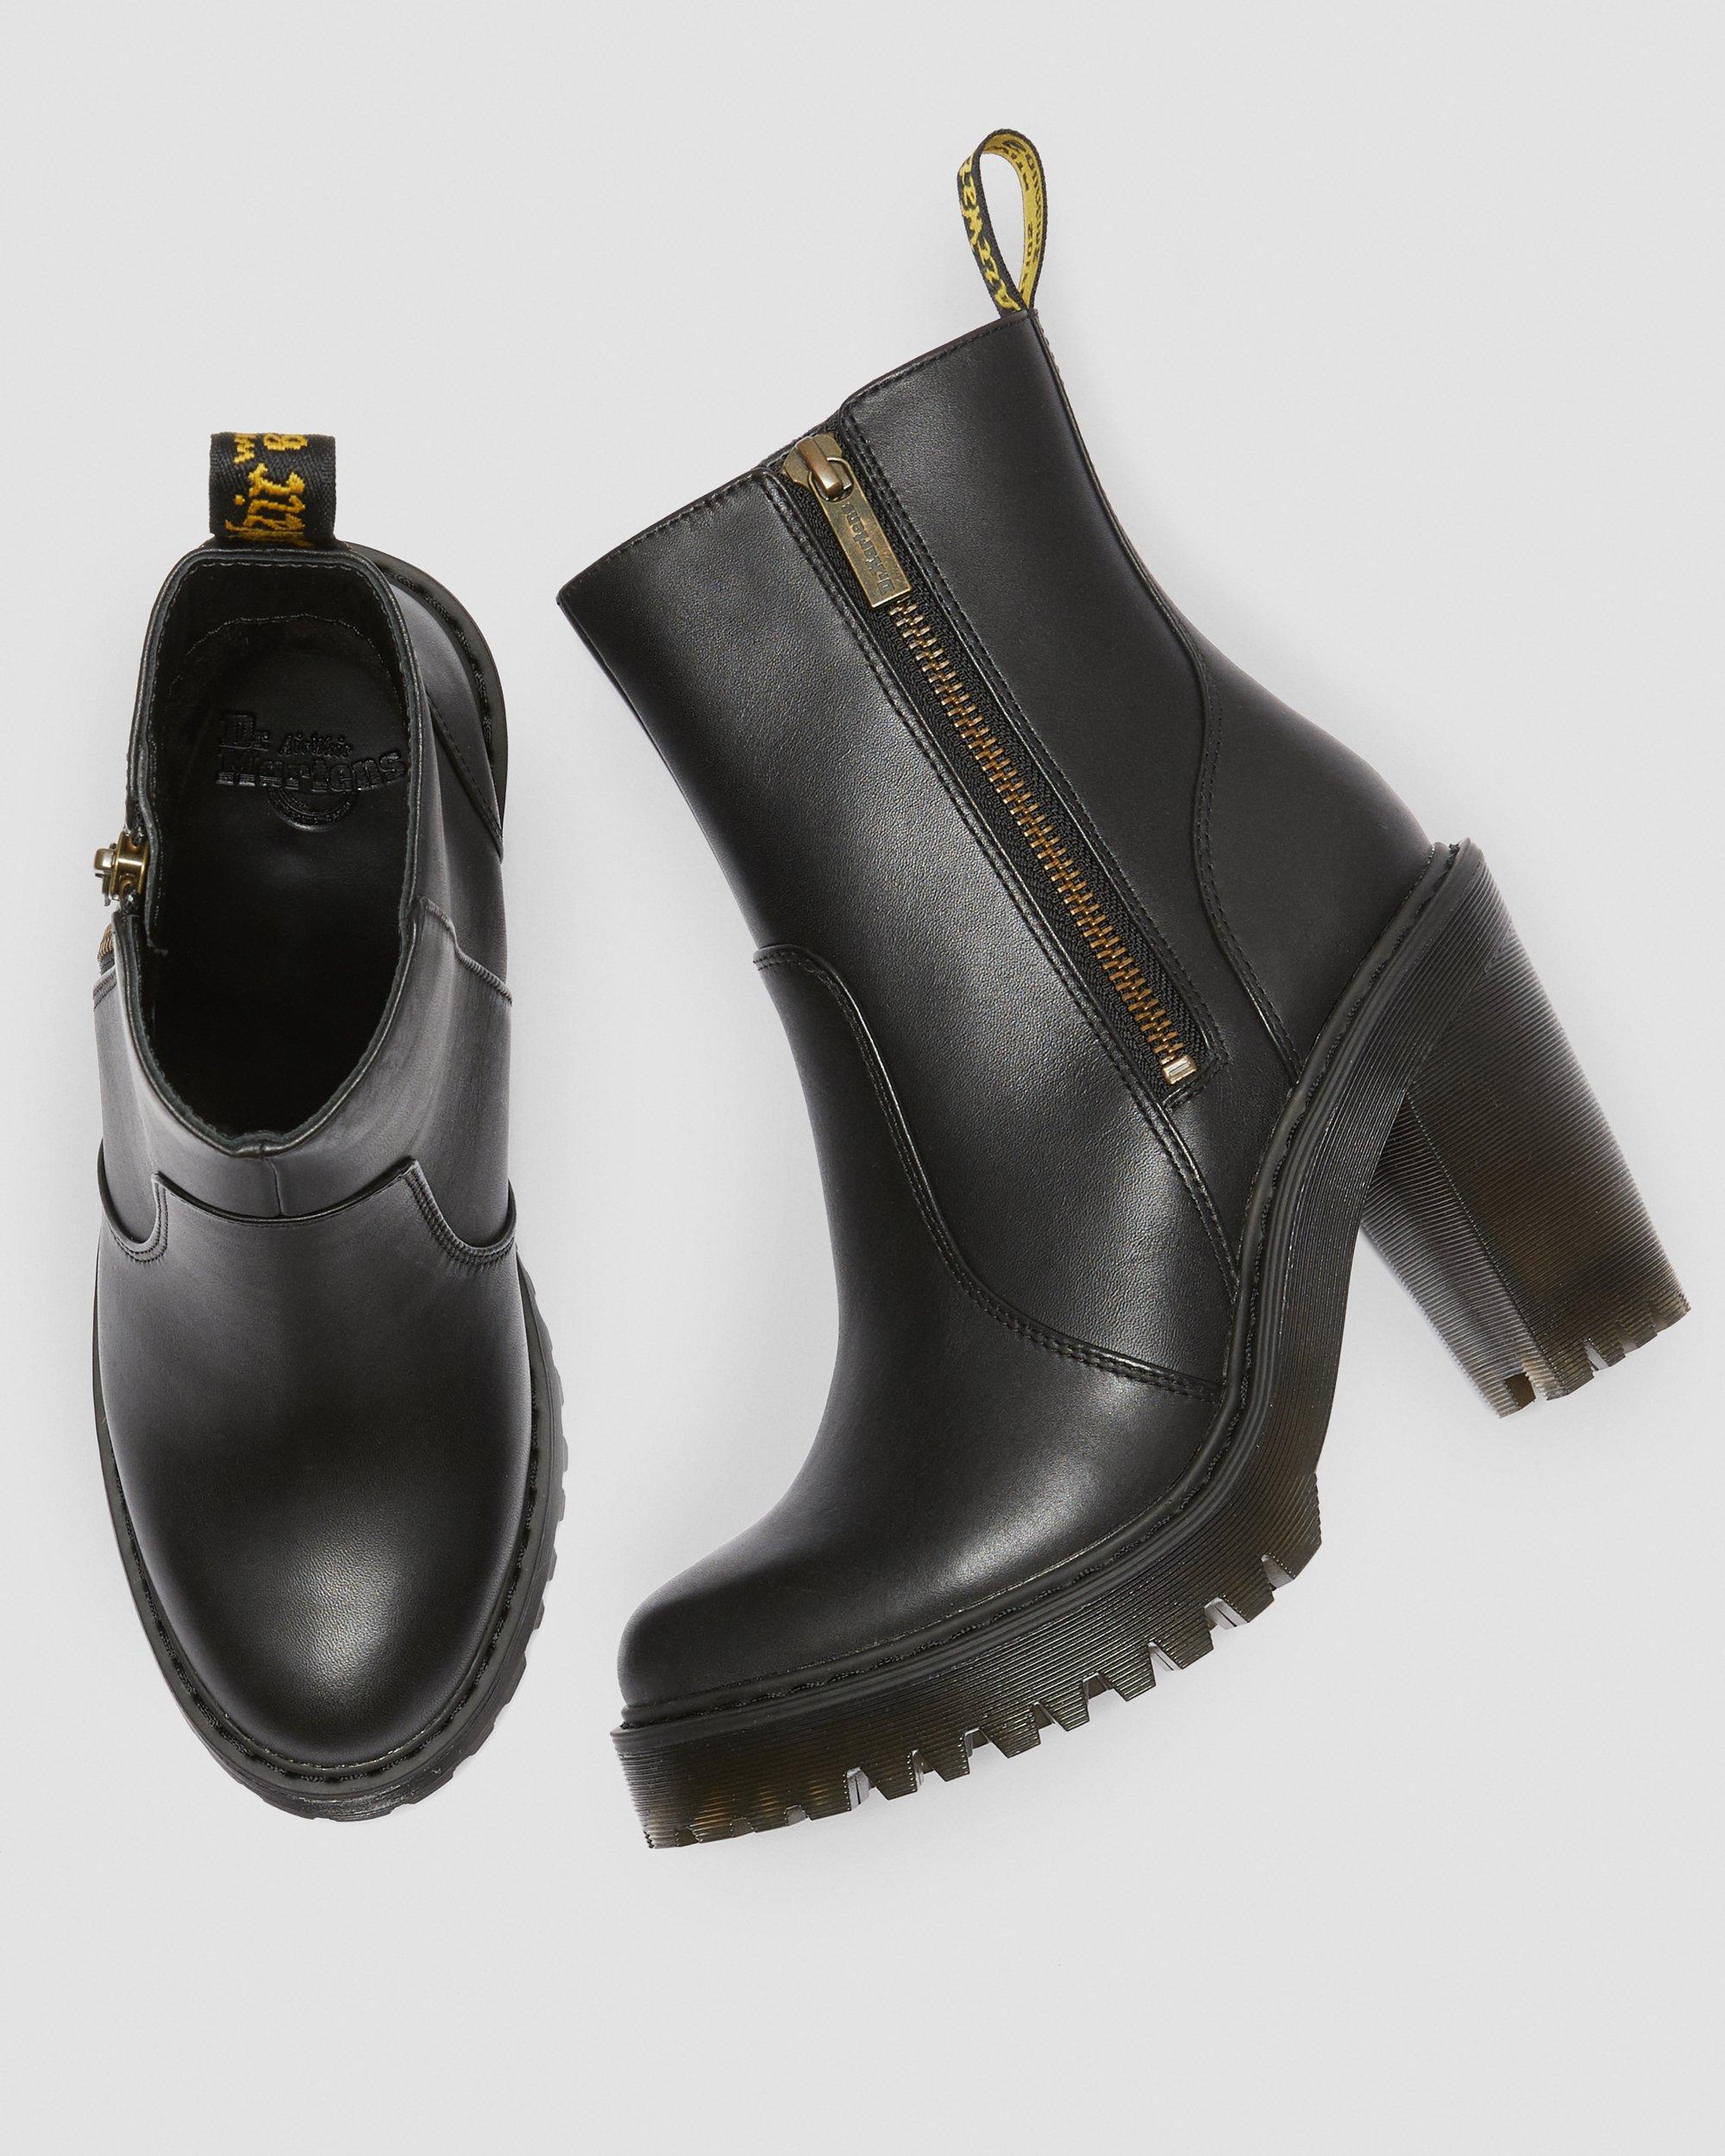 MAGDALENA II LEATHER HEELED ZIP BOOTS Dr. Martens